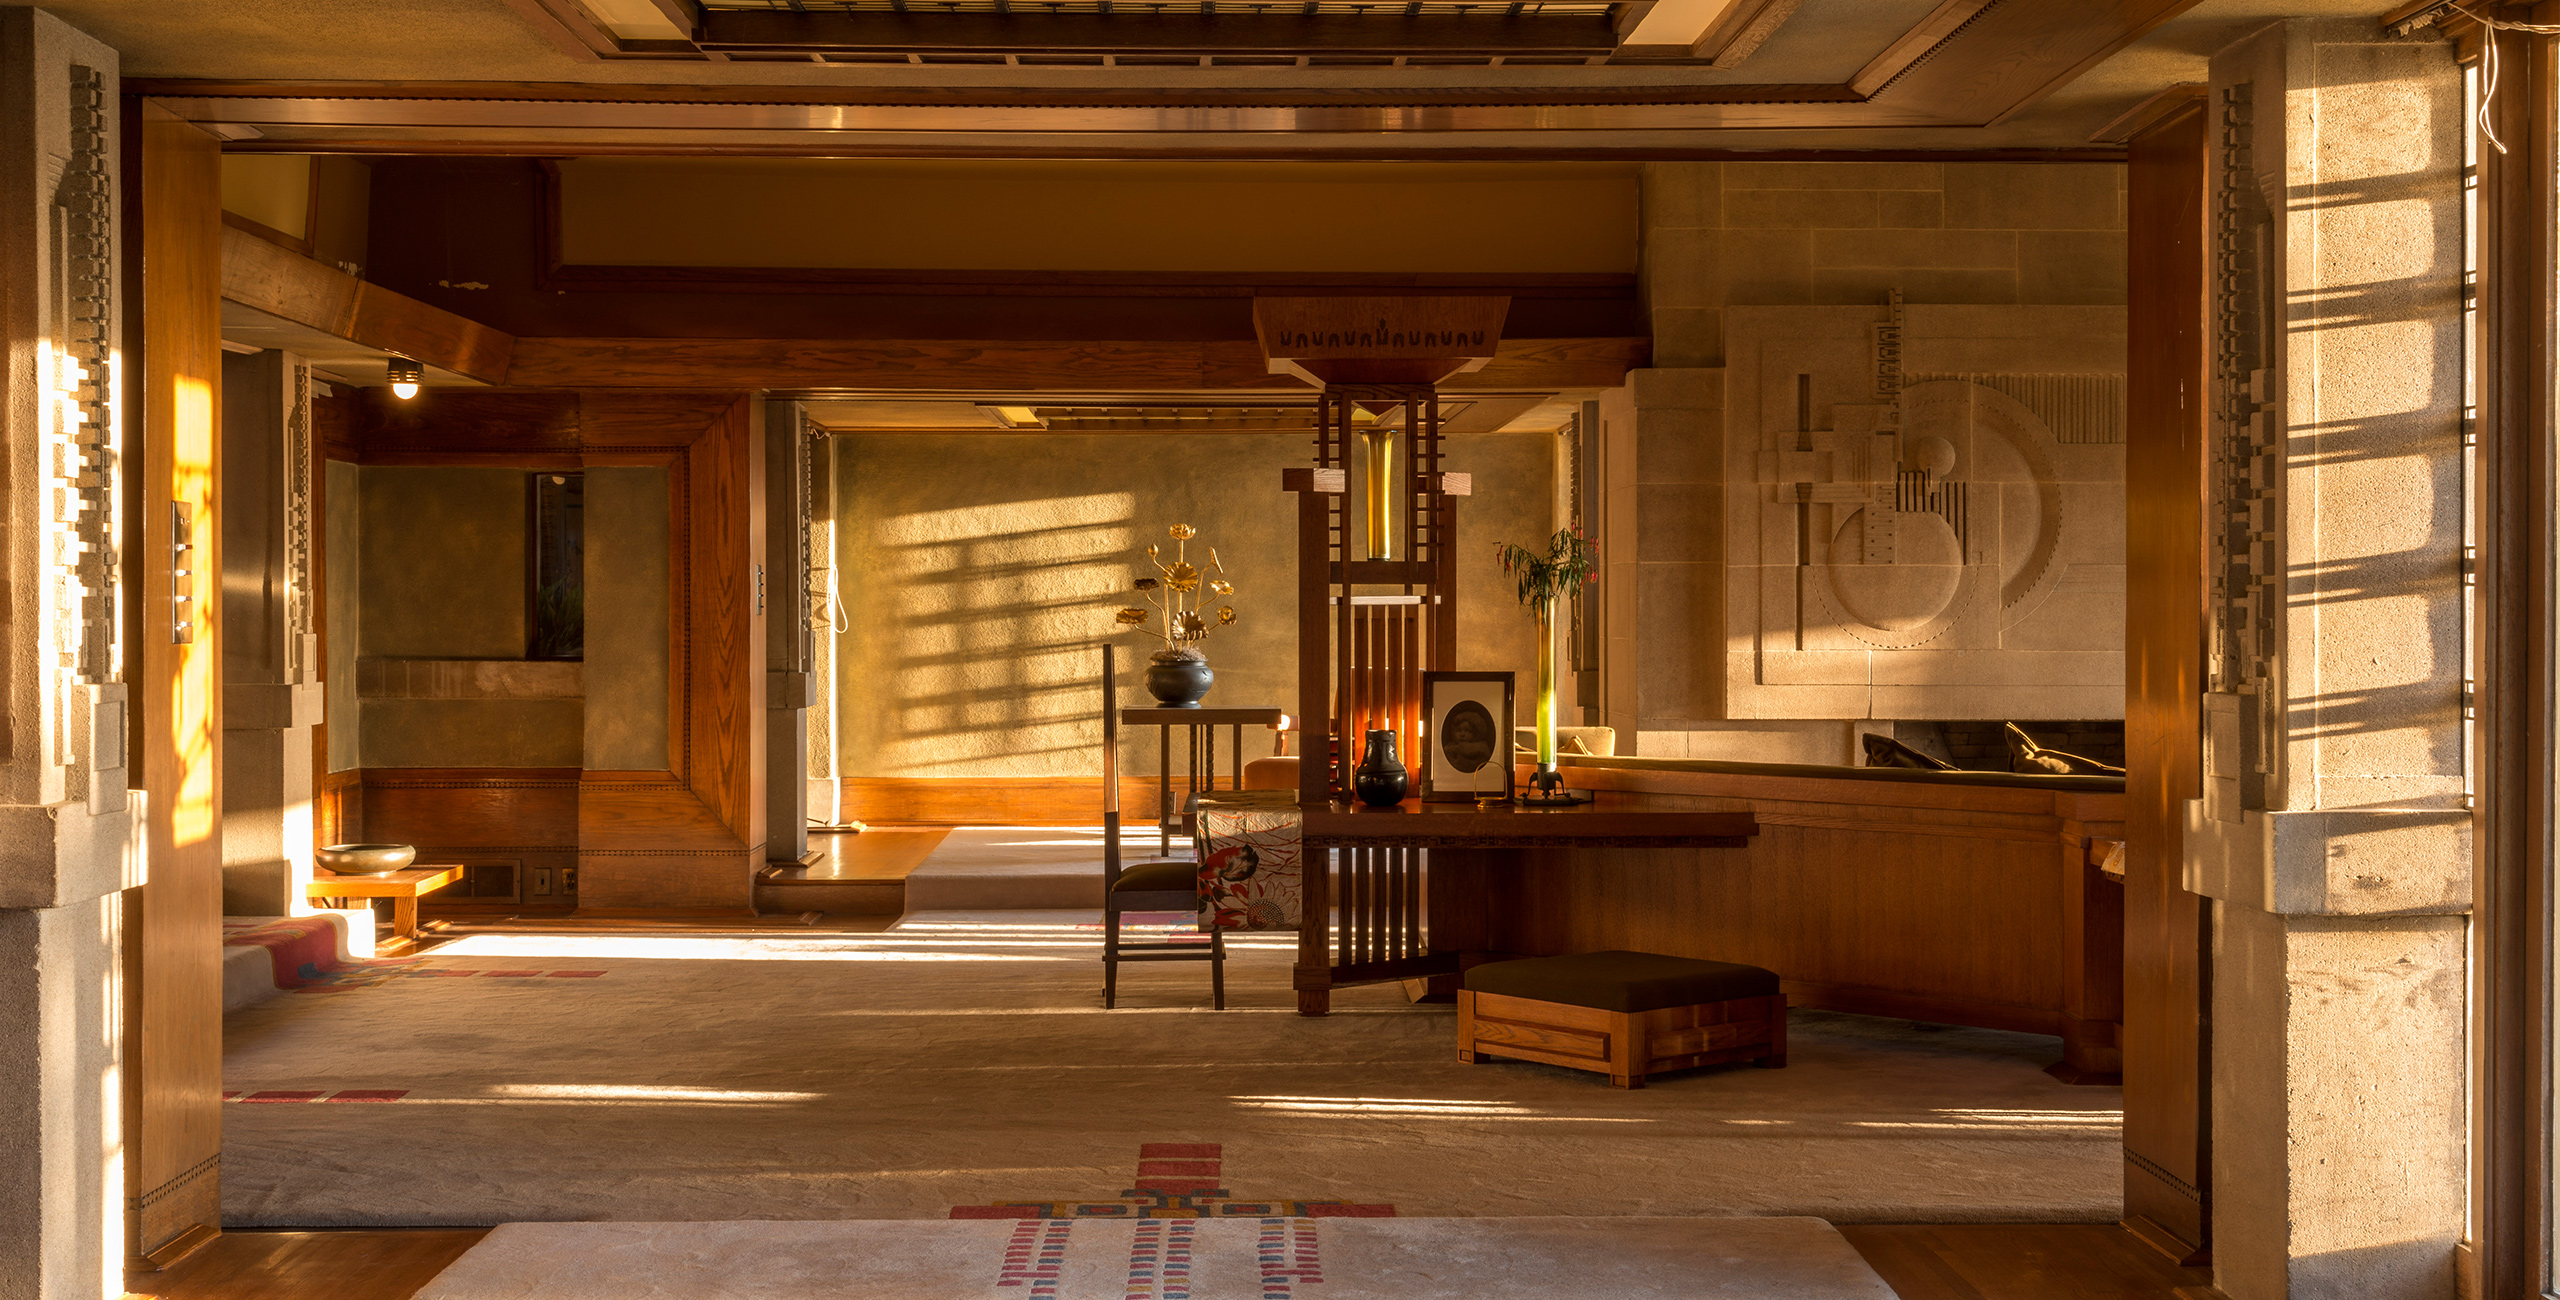 Frank Lloyd Wright&#x2019;s Hollyhock House, completed in 1921